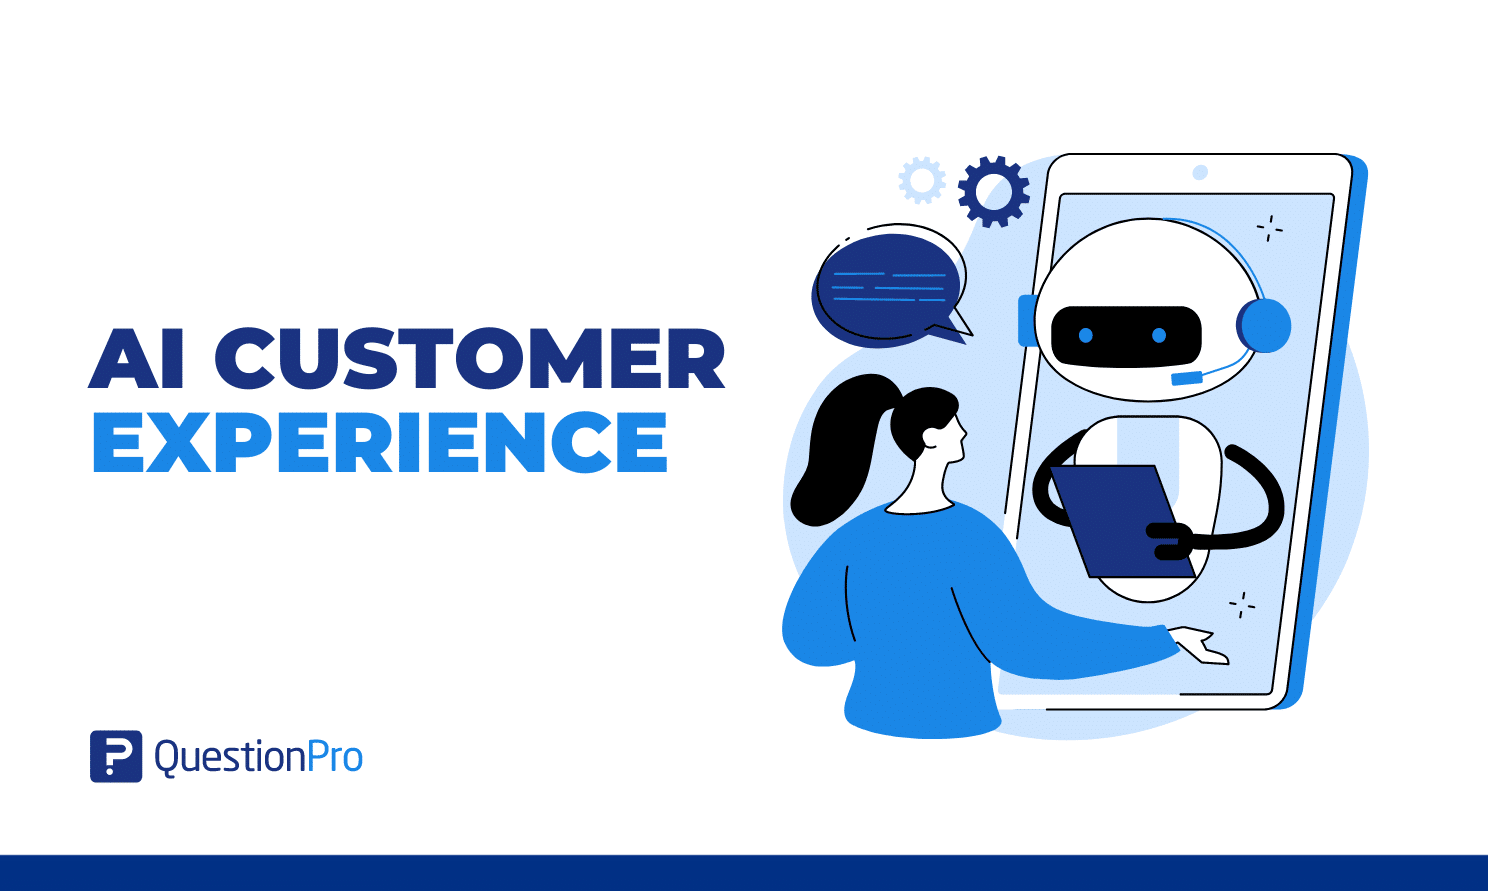 Unlocking Enhanced Customer Experiences with AI Customer Experience Tools and QuestionPro's Platform. Let's explore some ideas together!